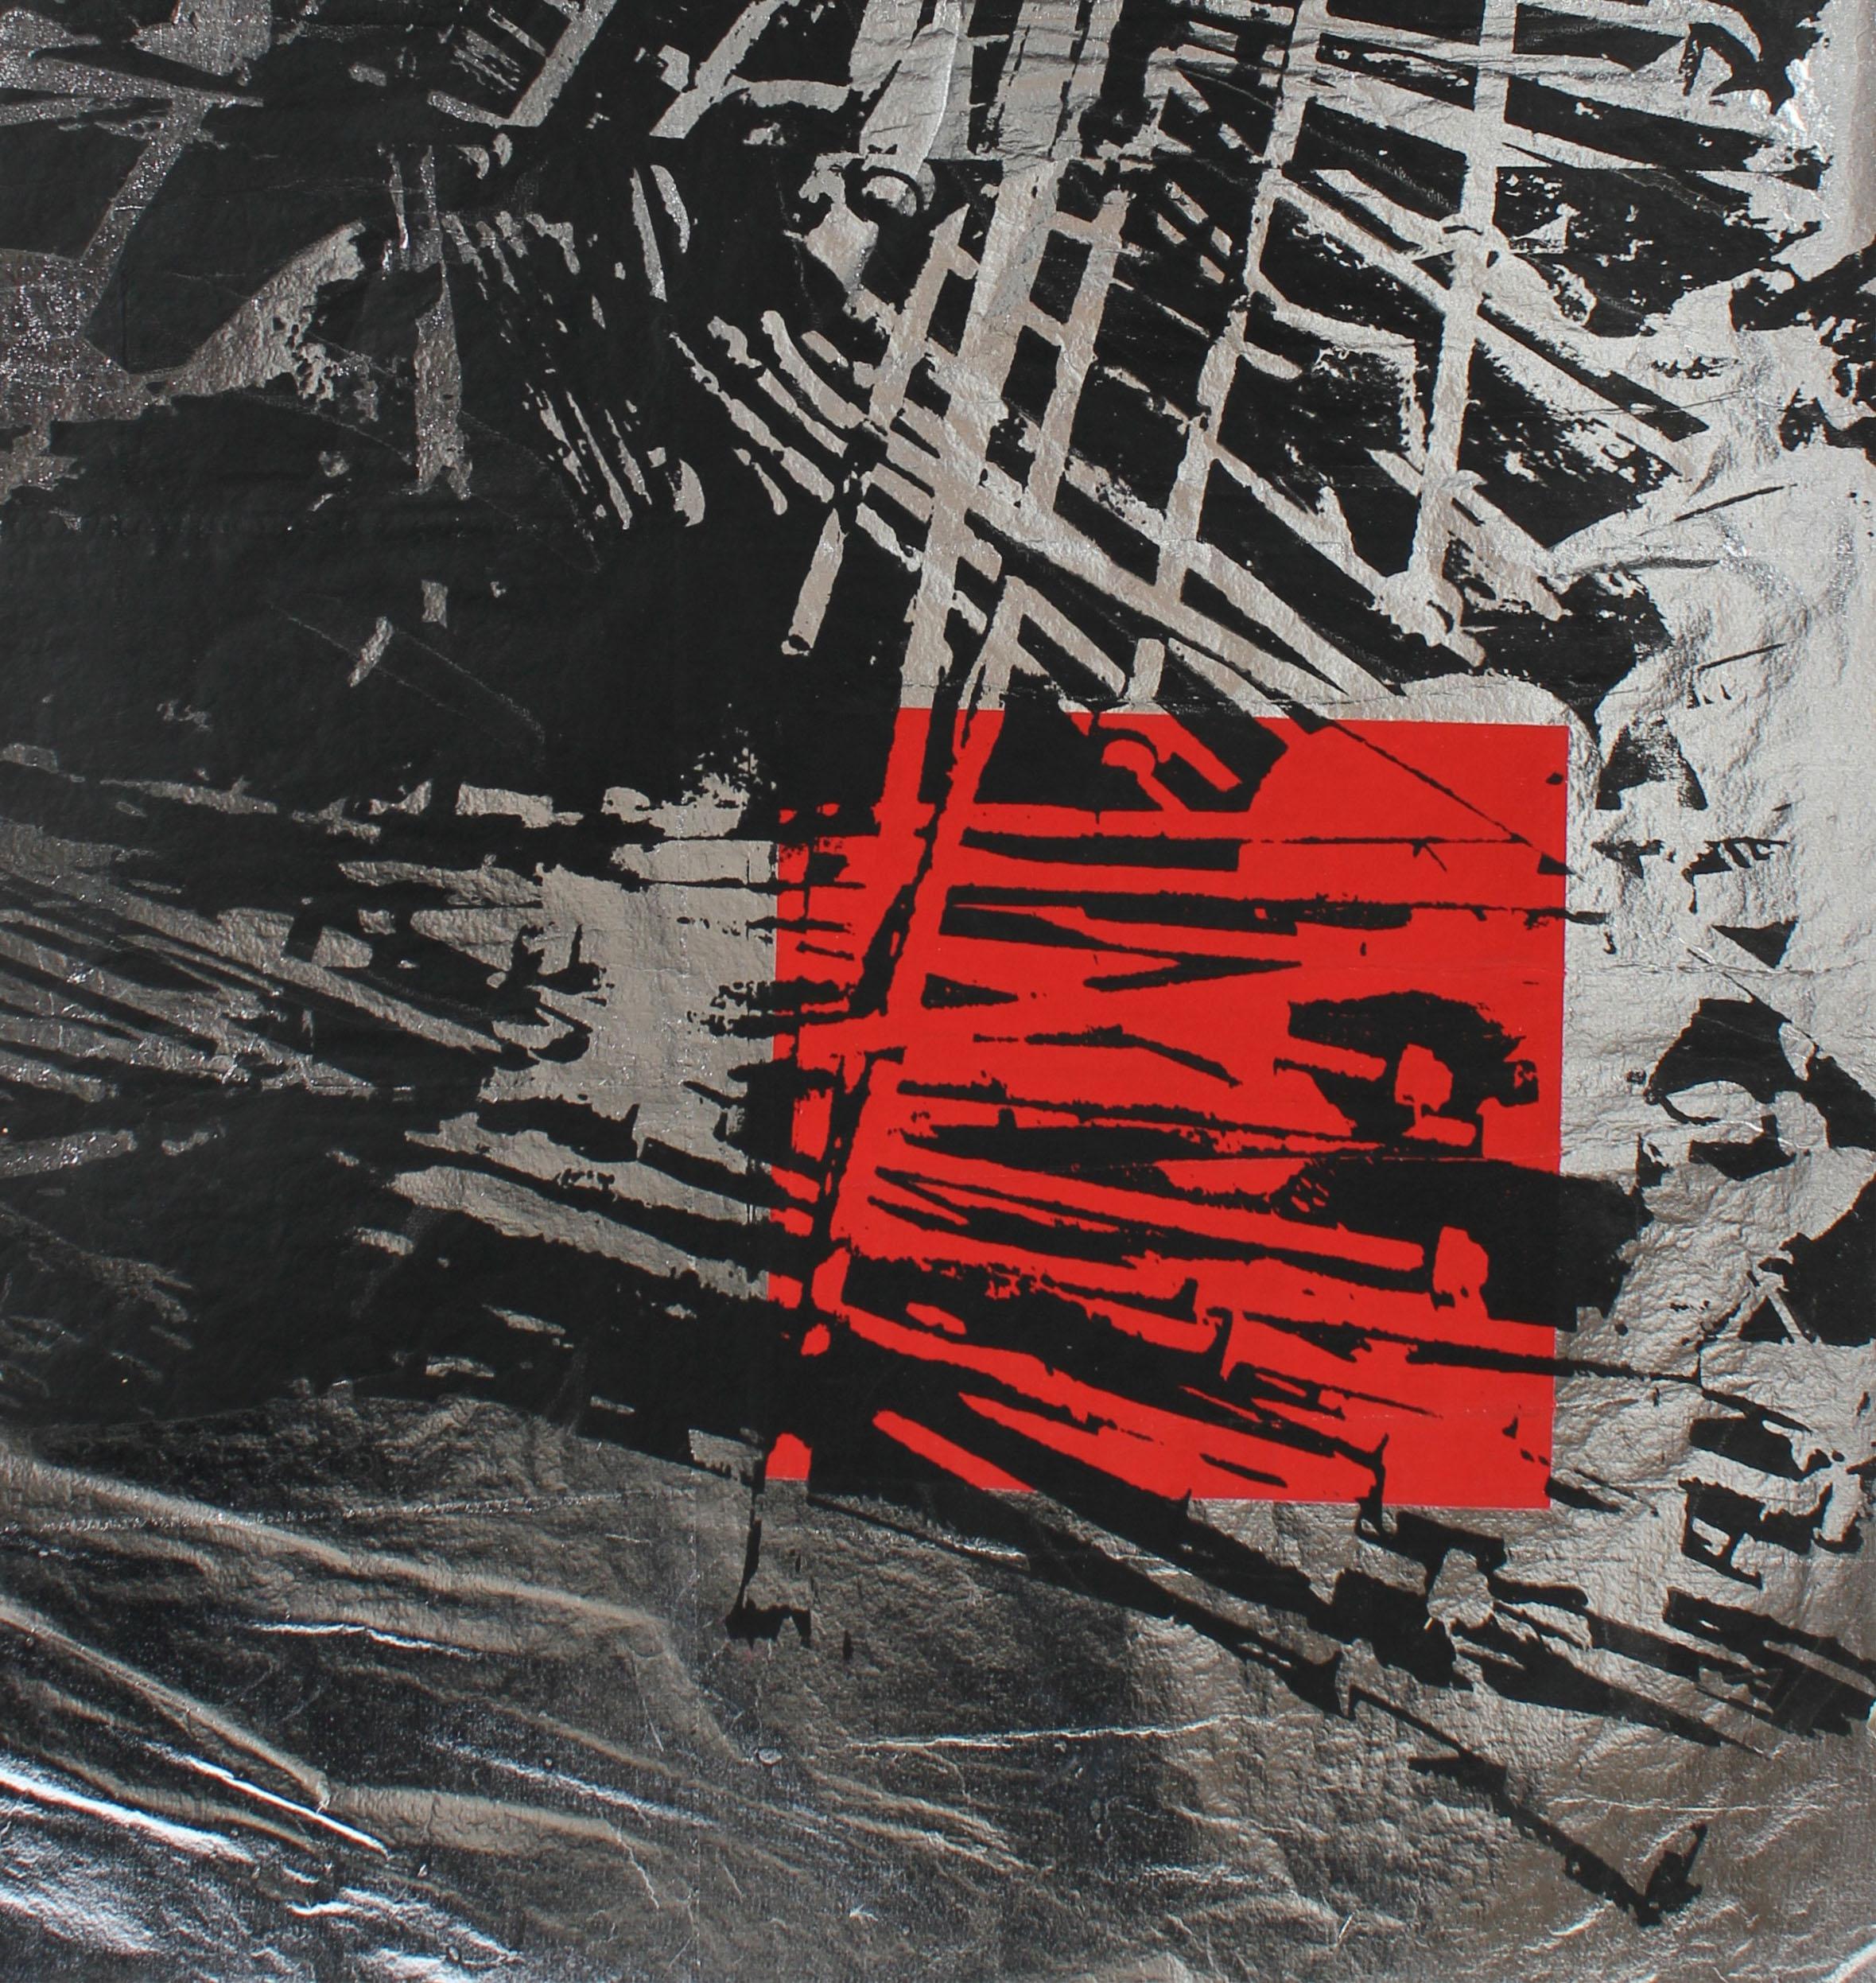 Graphic Serigraph in Black and Red on Silver Paper, circa 1970's - Print by Barbara Lewis